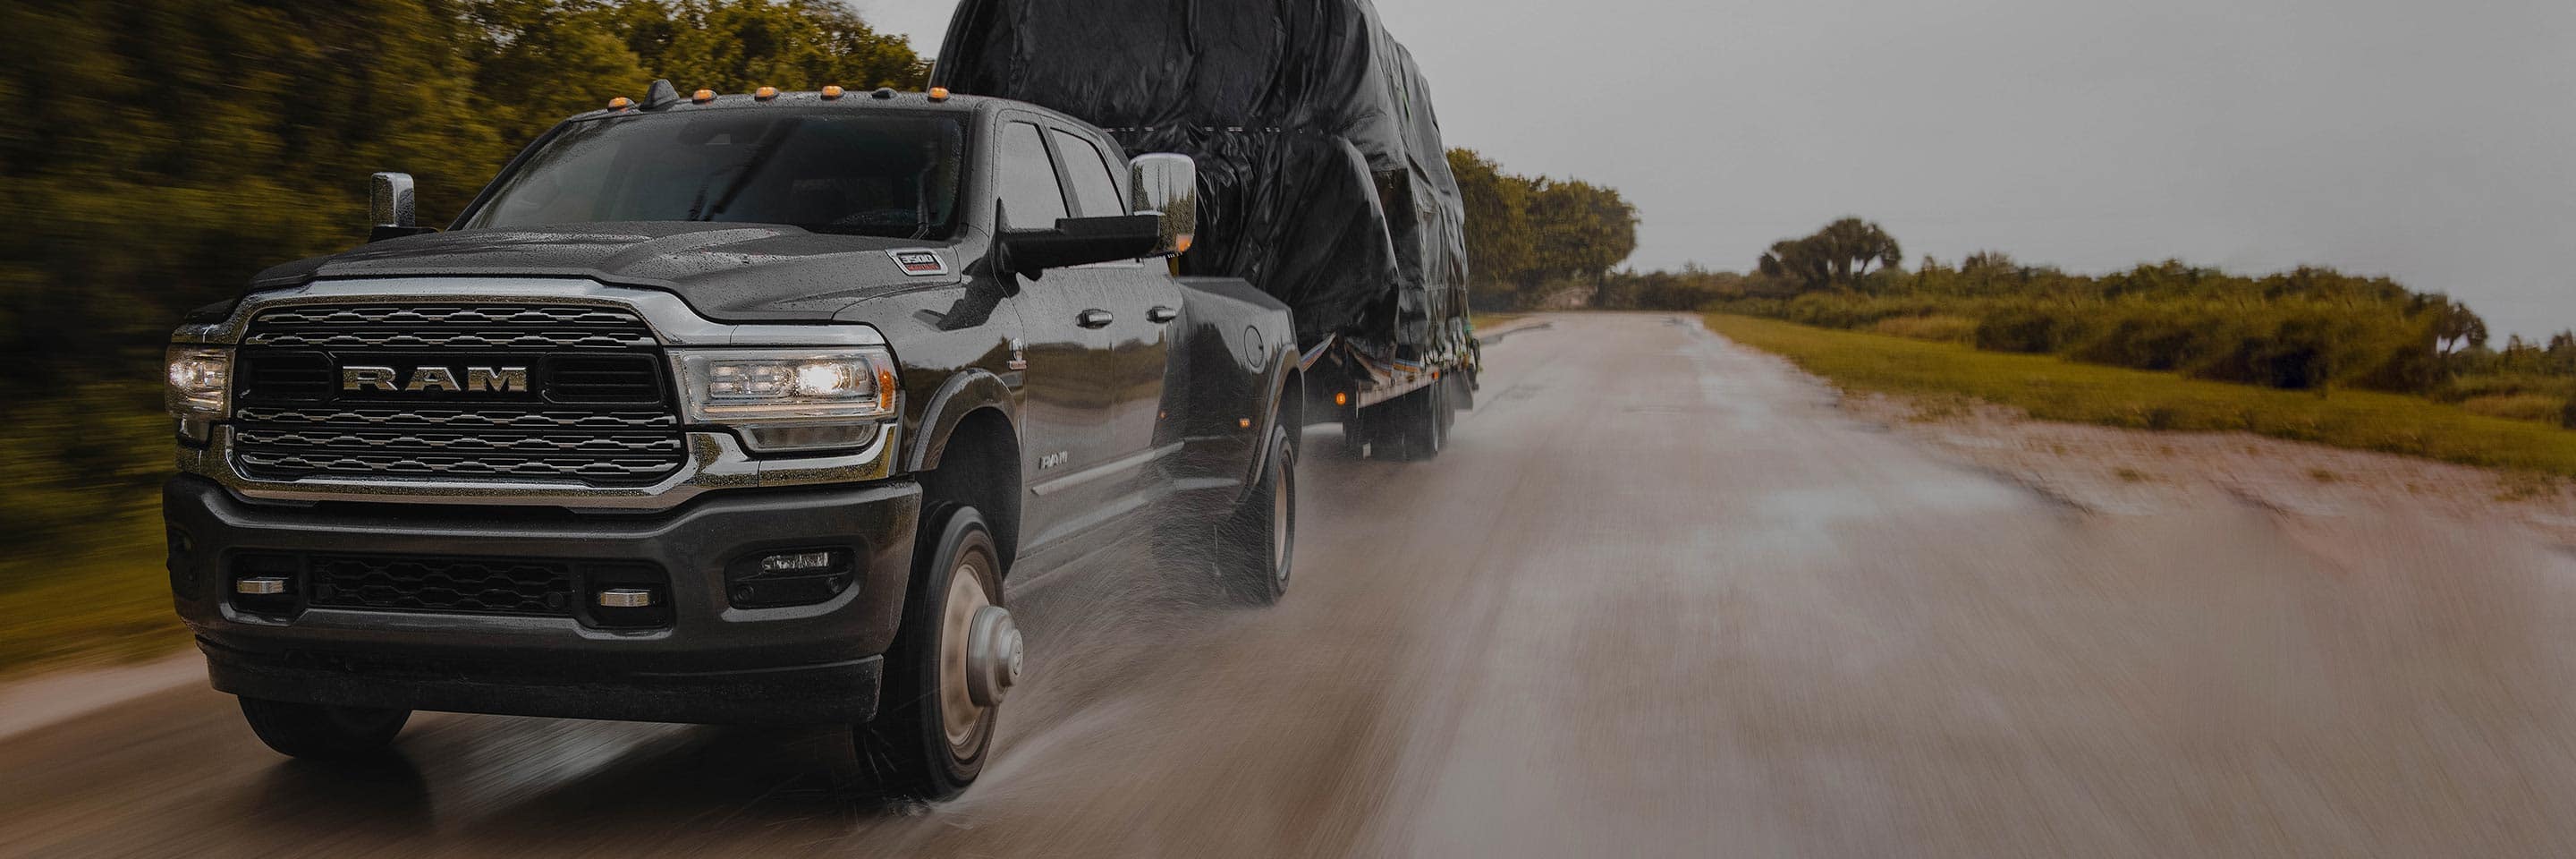 The 2022 Ram 3500 towing a covered load in the rain.